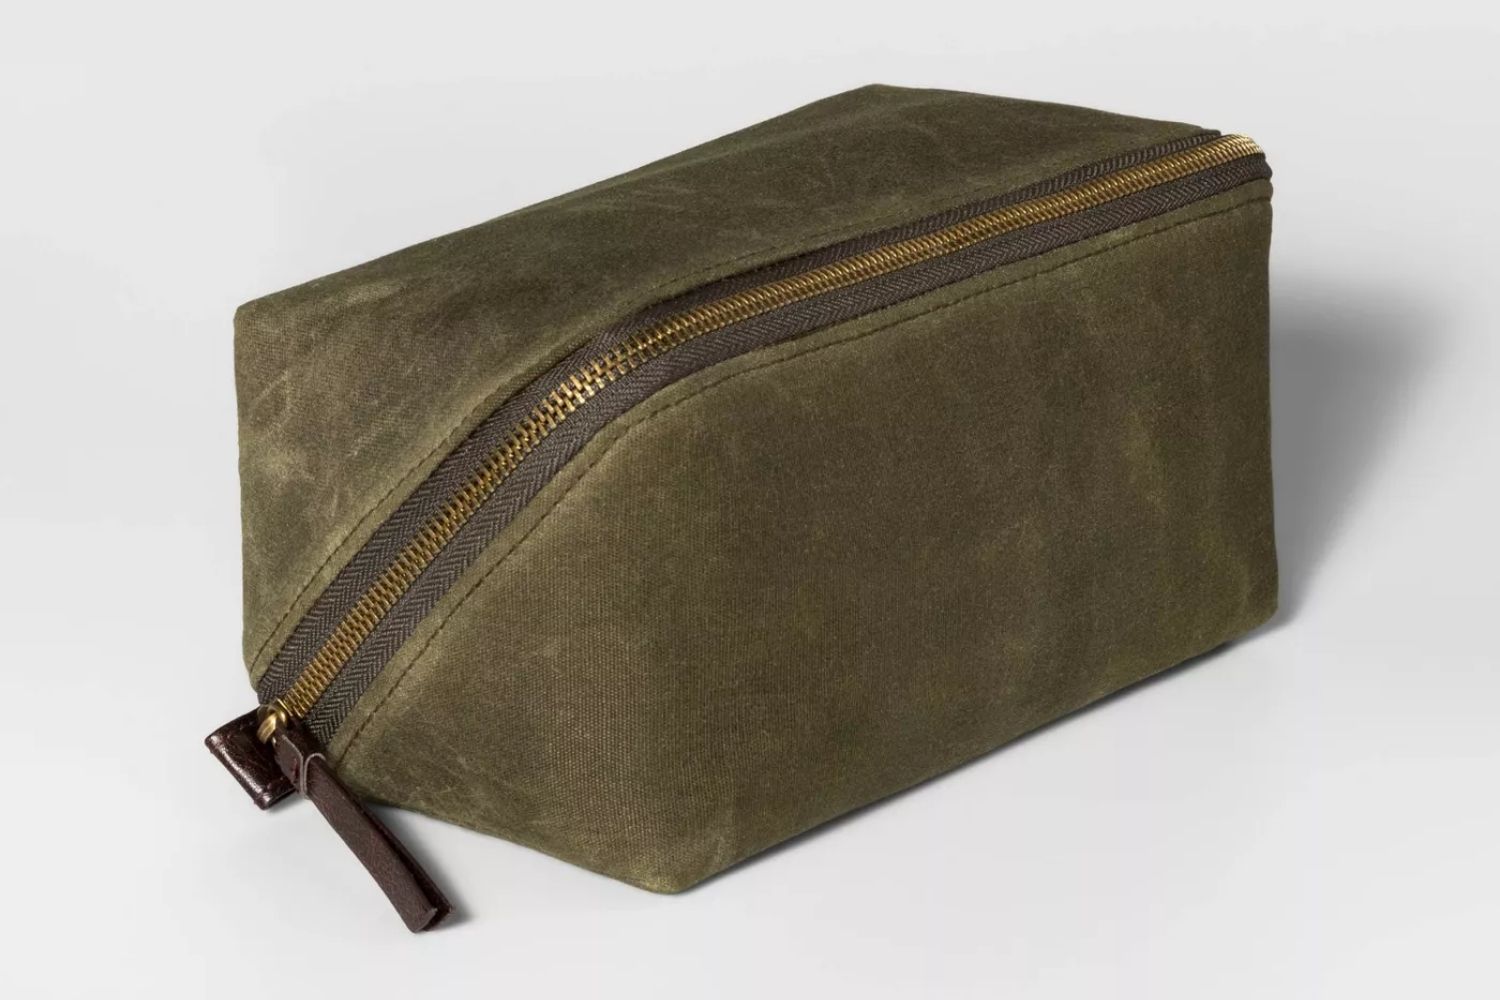 The Best Travel Gifts Option: Goodfellow and Co. Men’s Olive Diagonal Zip Kit